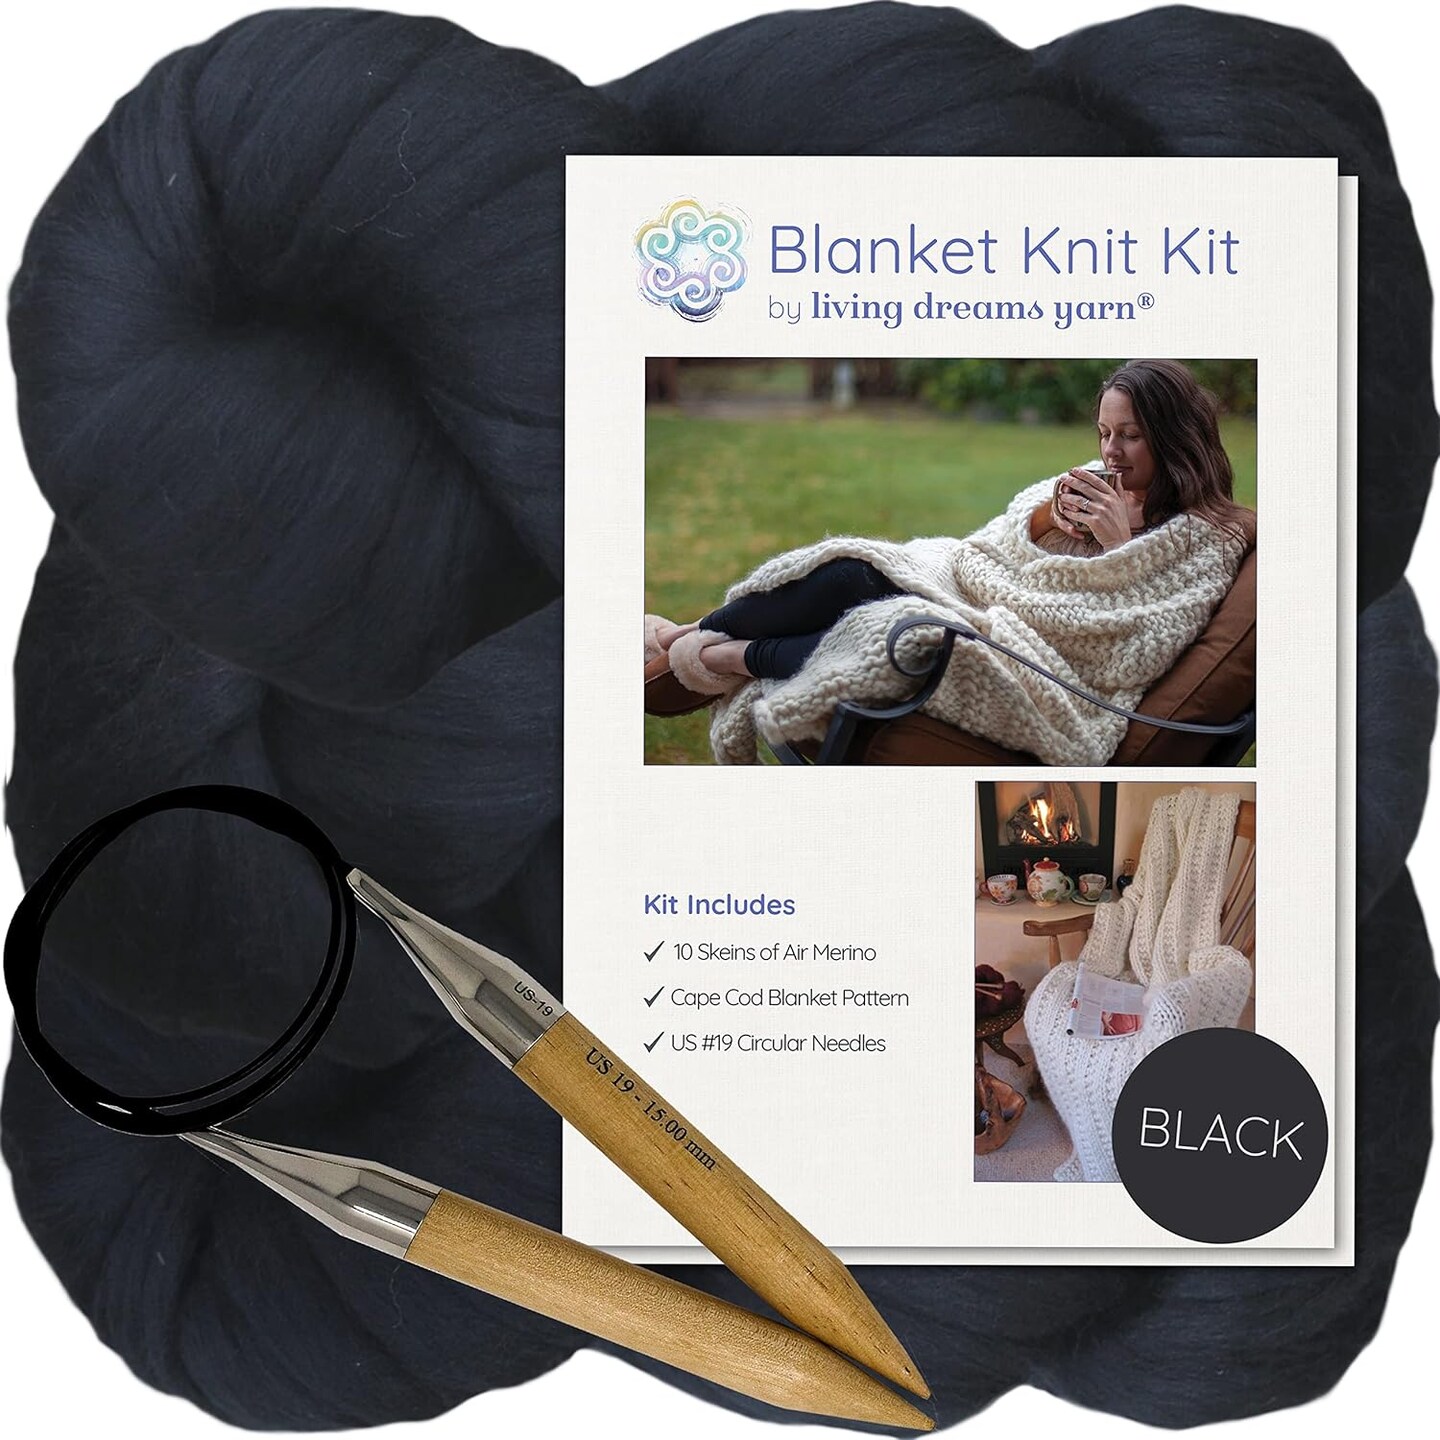 DIY Merino Wool Blanket Knitting Kit: Soft and Thick #7 Weight Jumbo Yarn, Knitting Needles and Pattern. Soft, Cozy, Great for Gifts